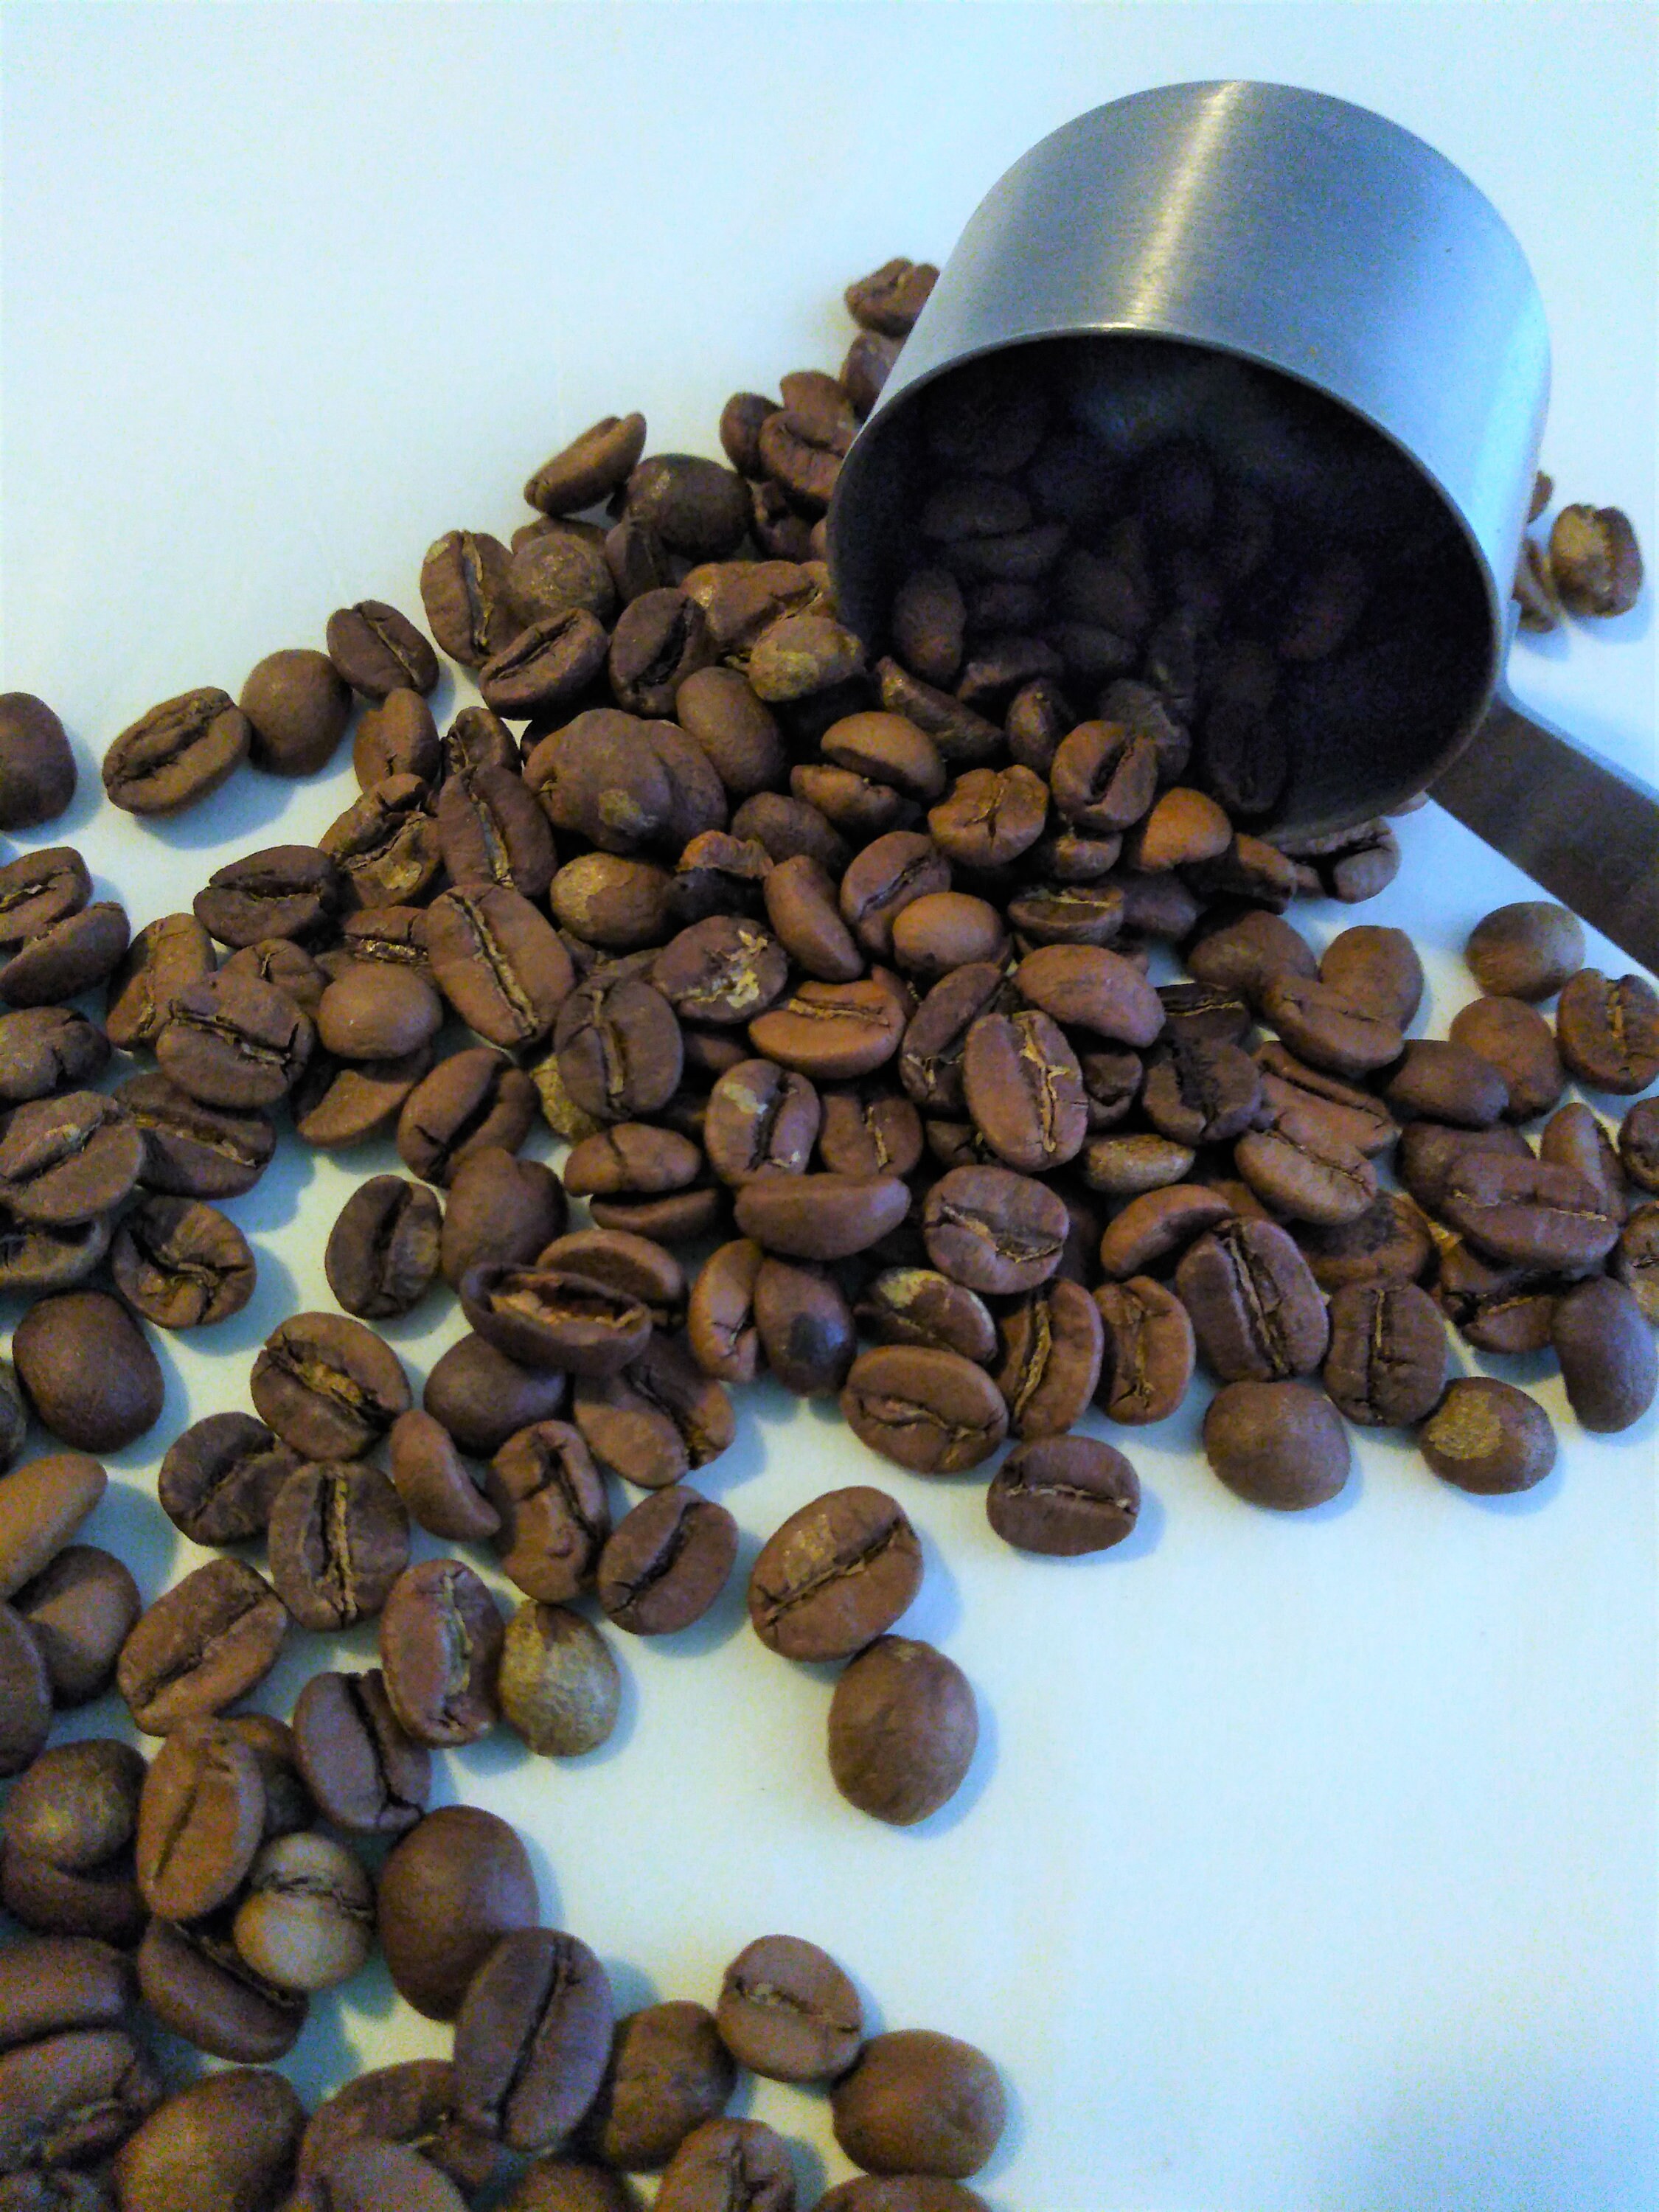 Bourbon Infused Coffee, Small Batch